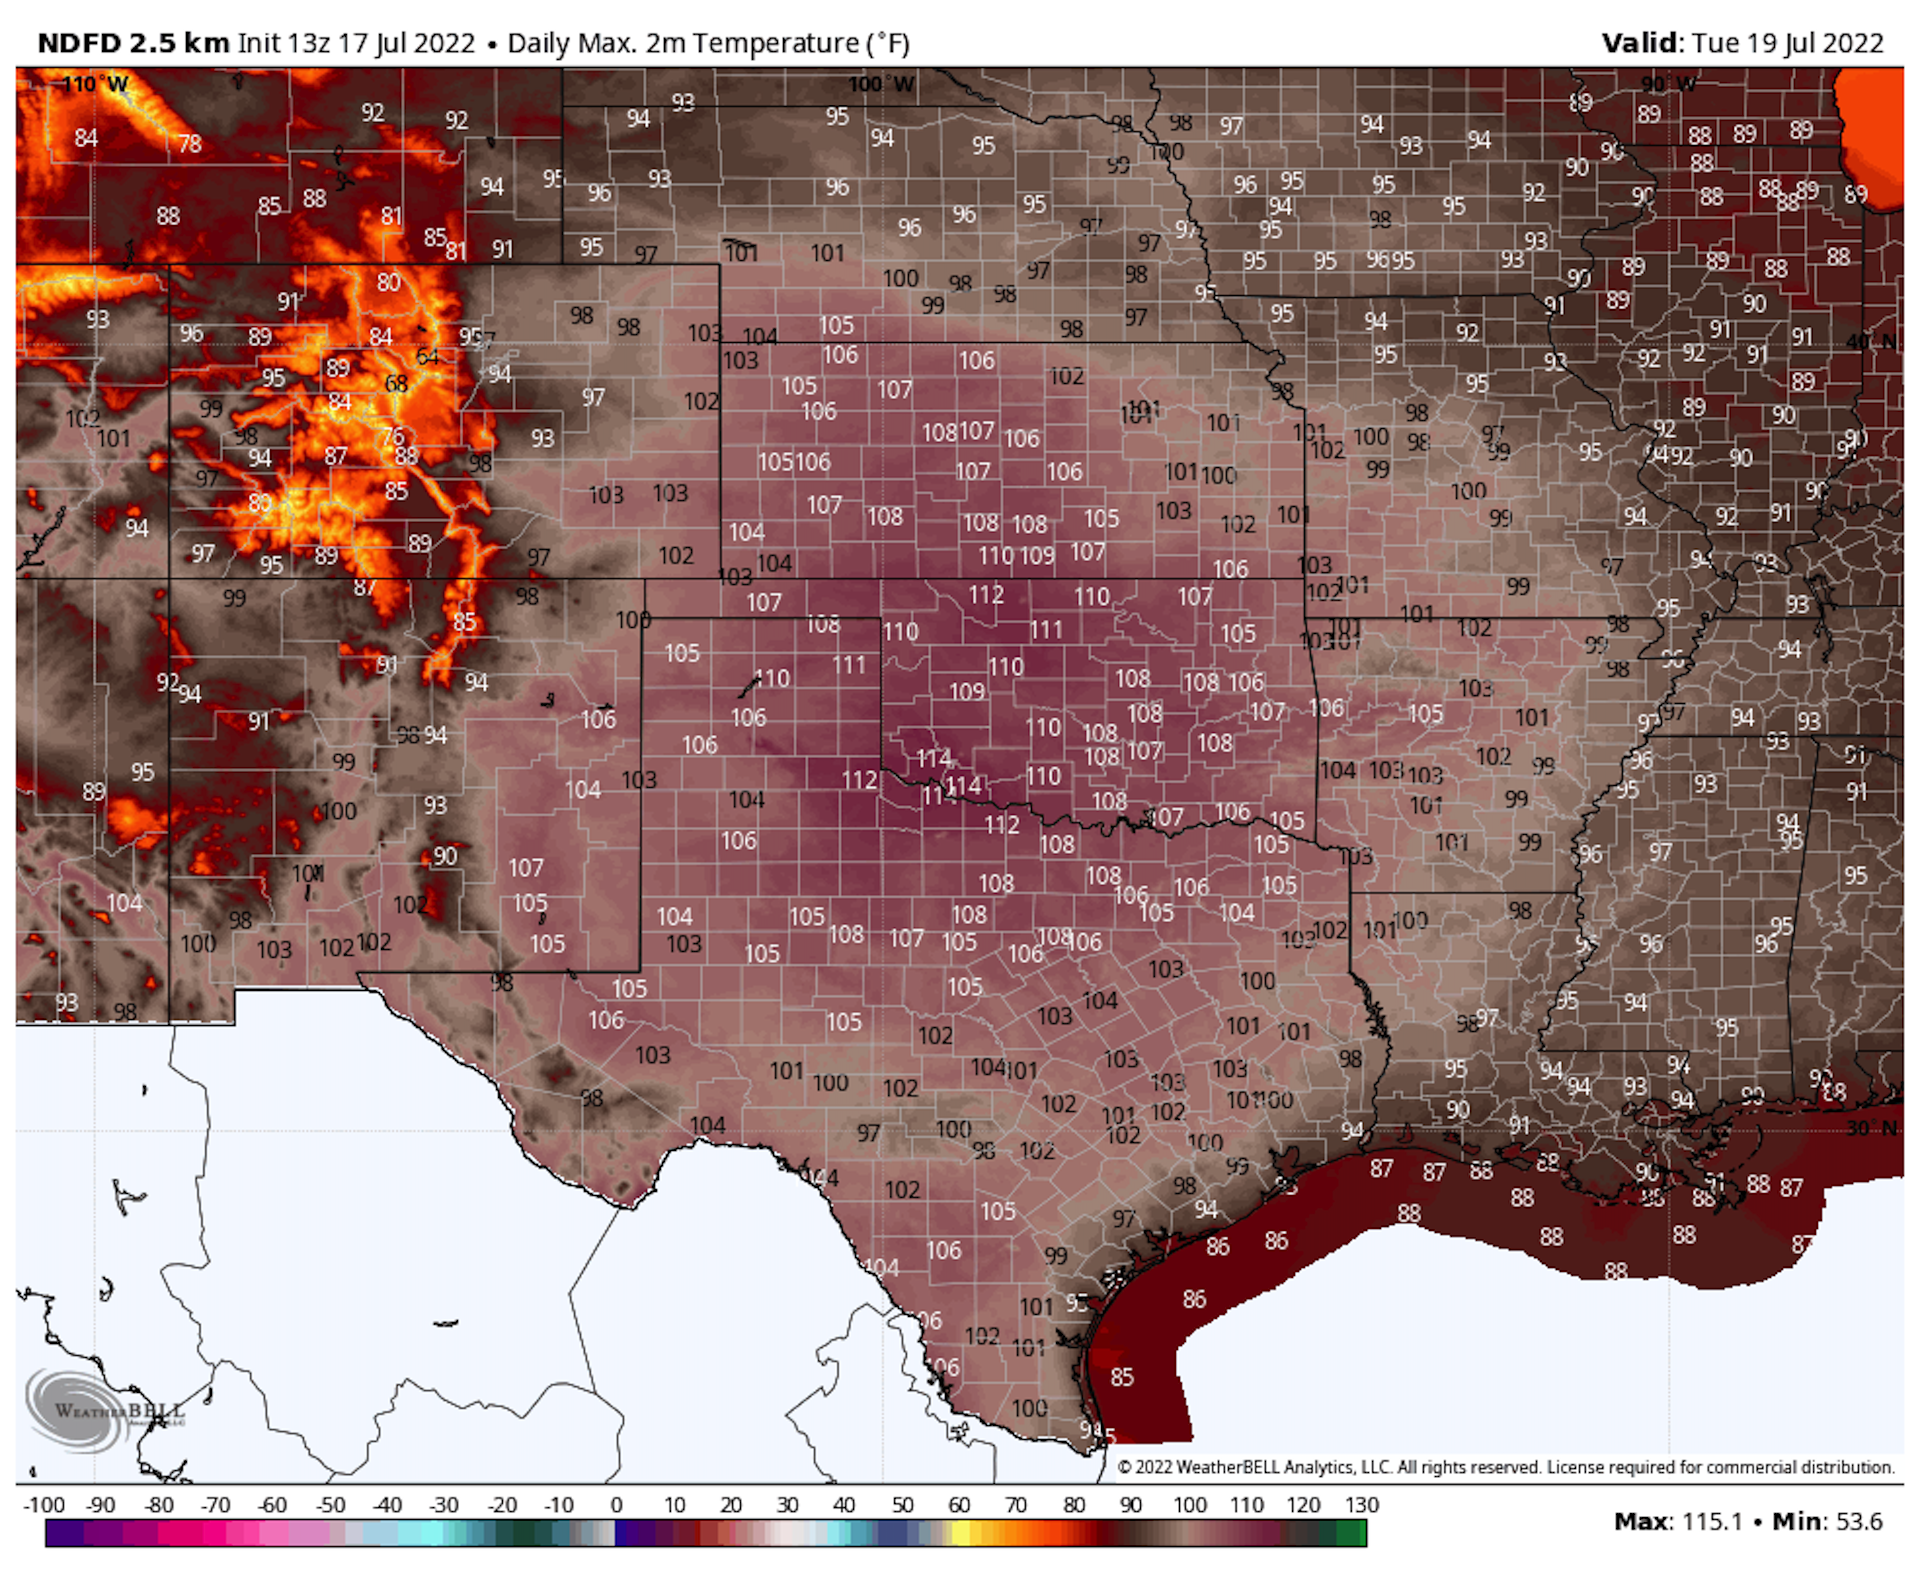 High temperature forecast map for July 19, 2022 in Texas and surrounding states.